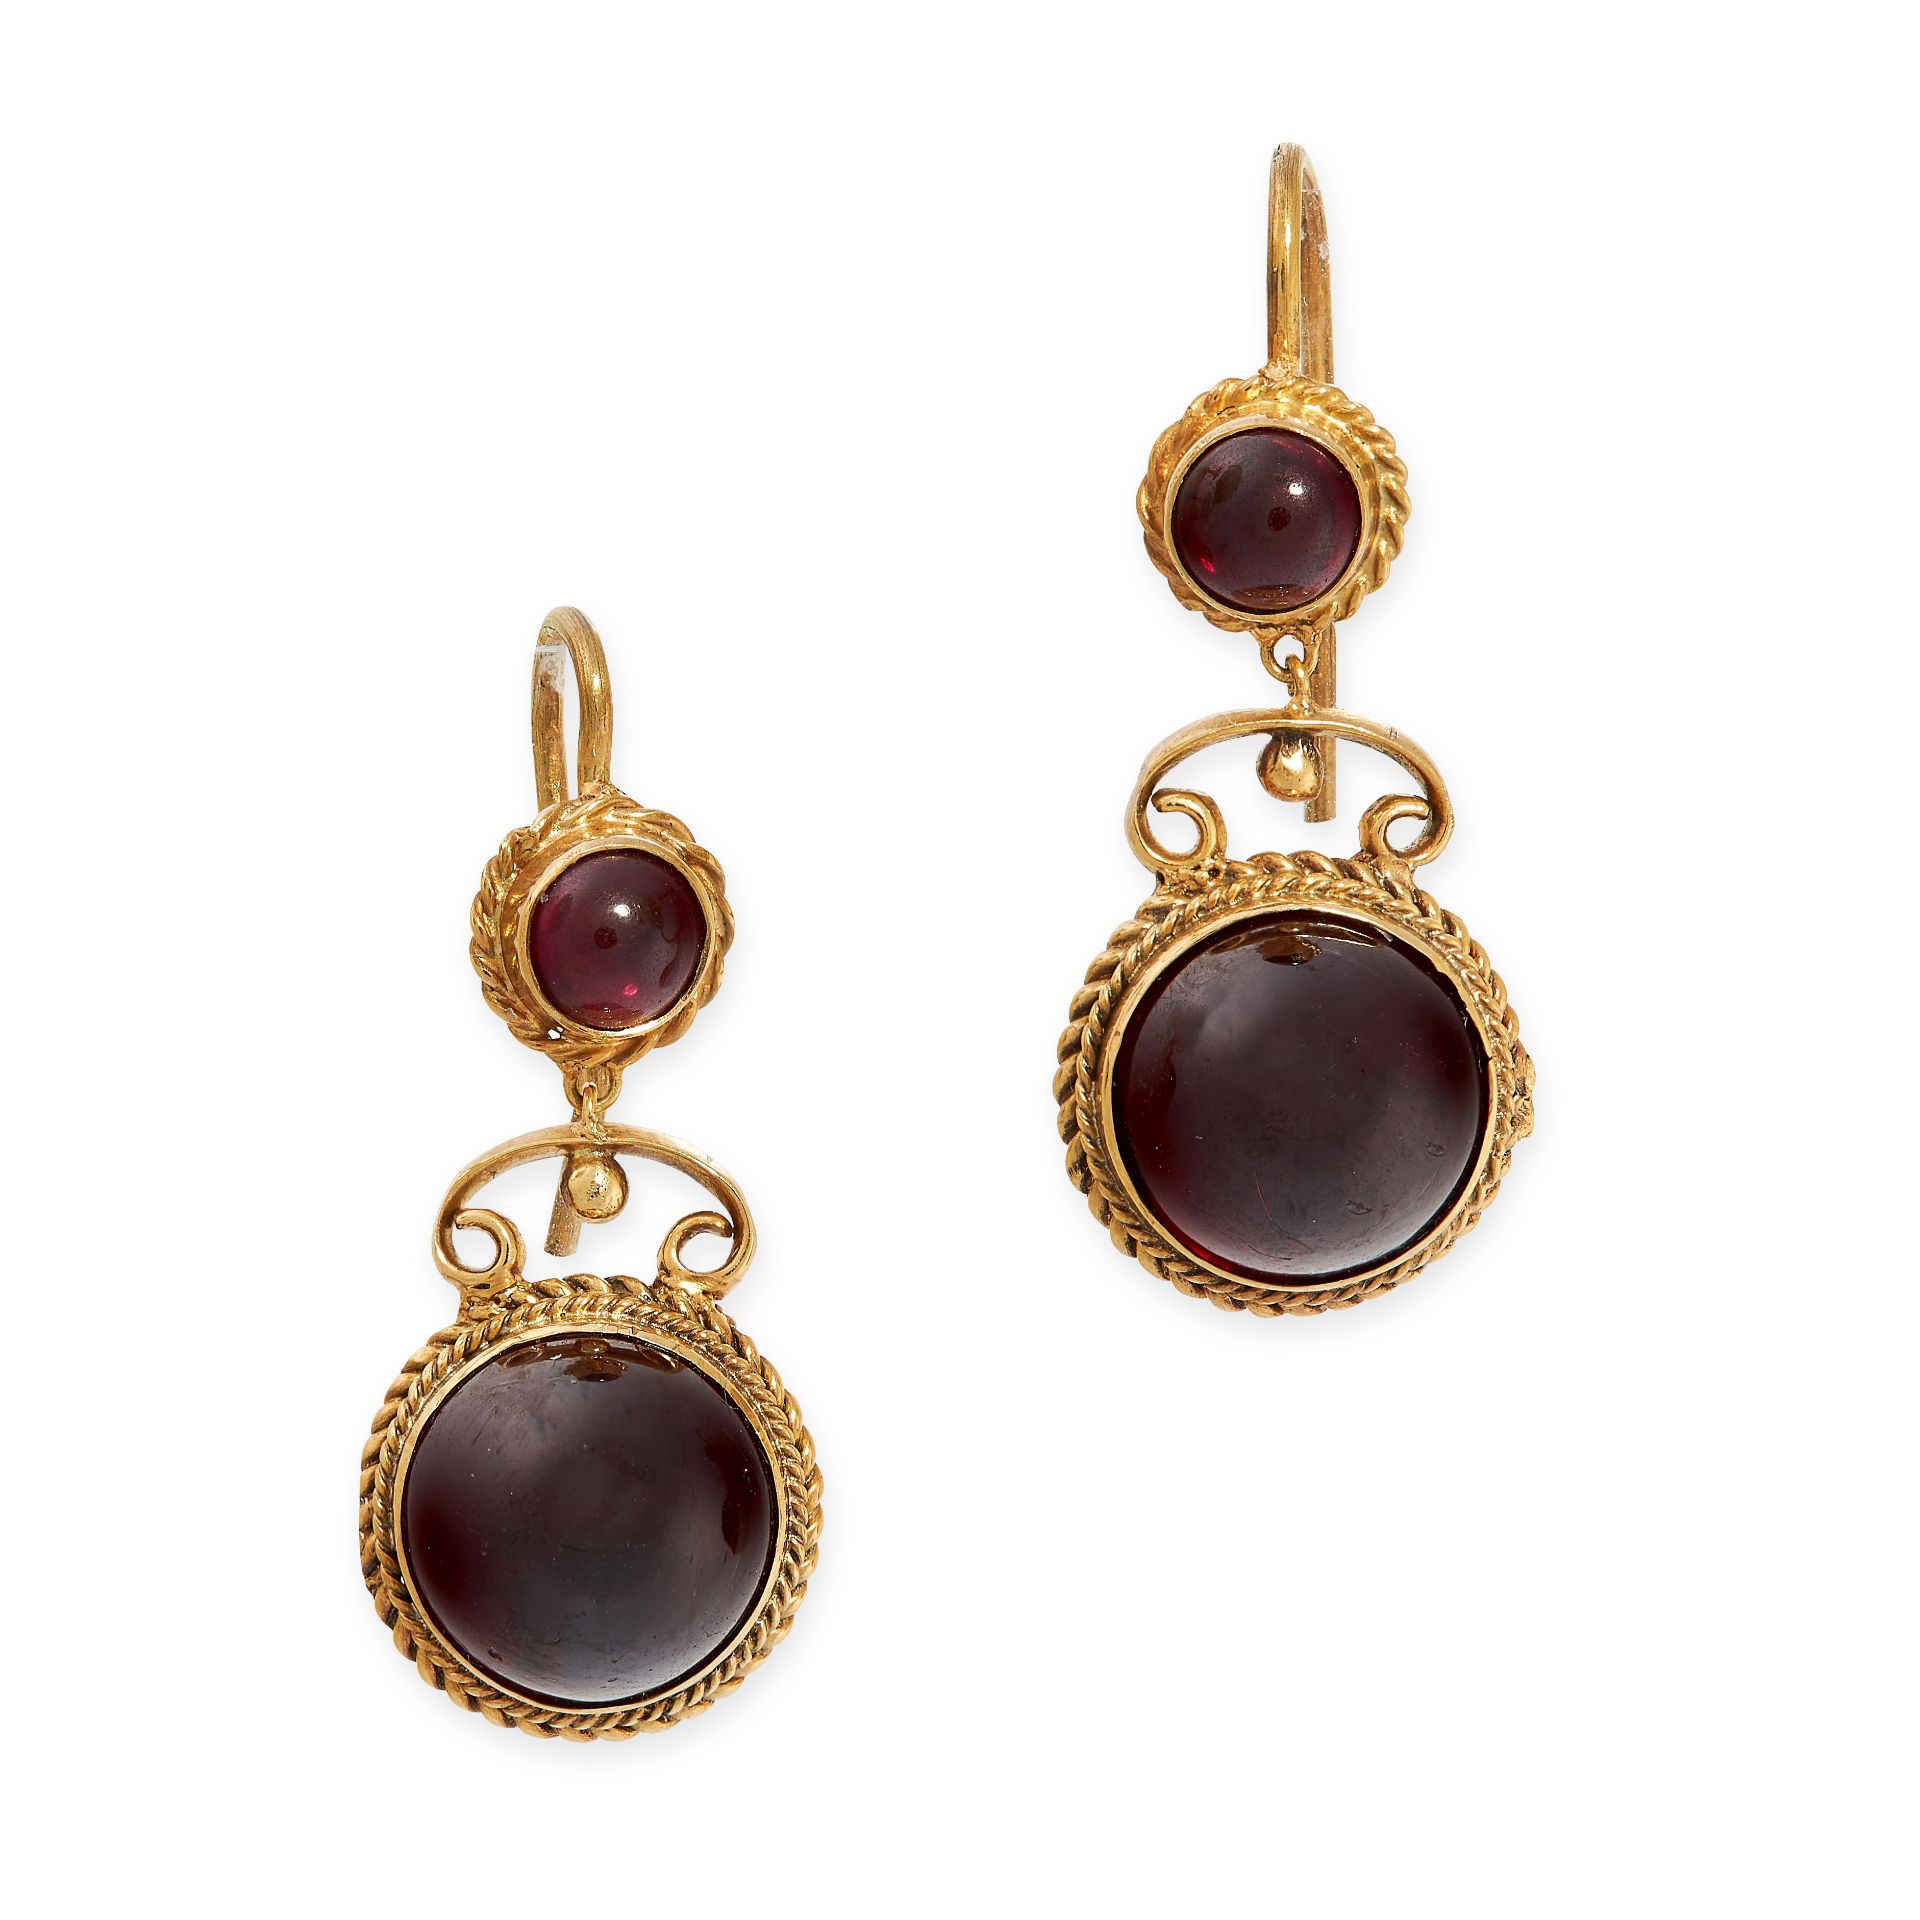 A PAIR OF ANTIQUE GARNET DROP EARRINGS, 19TH CENTURY in yellow gold, each set with a circular